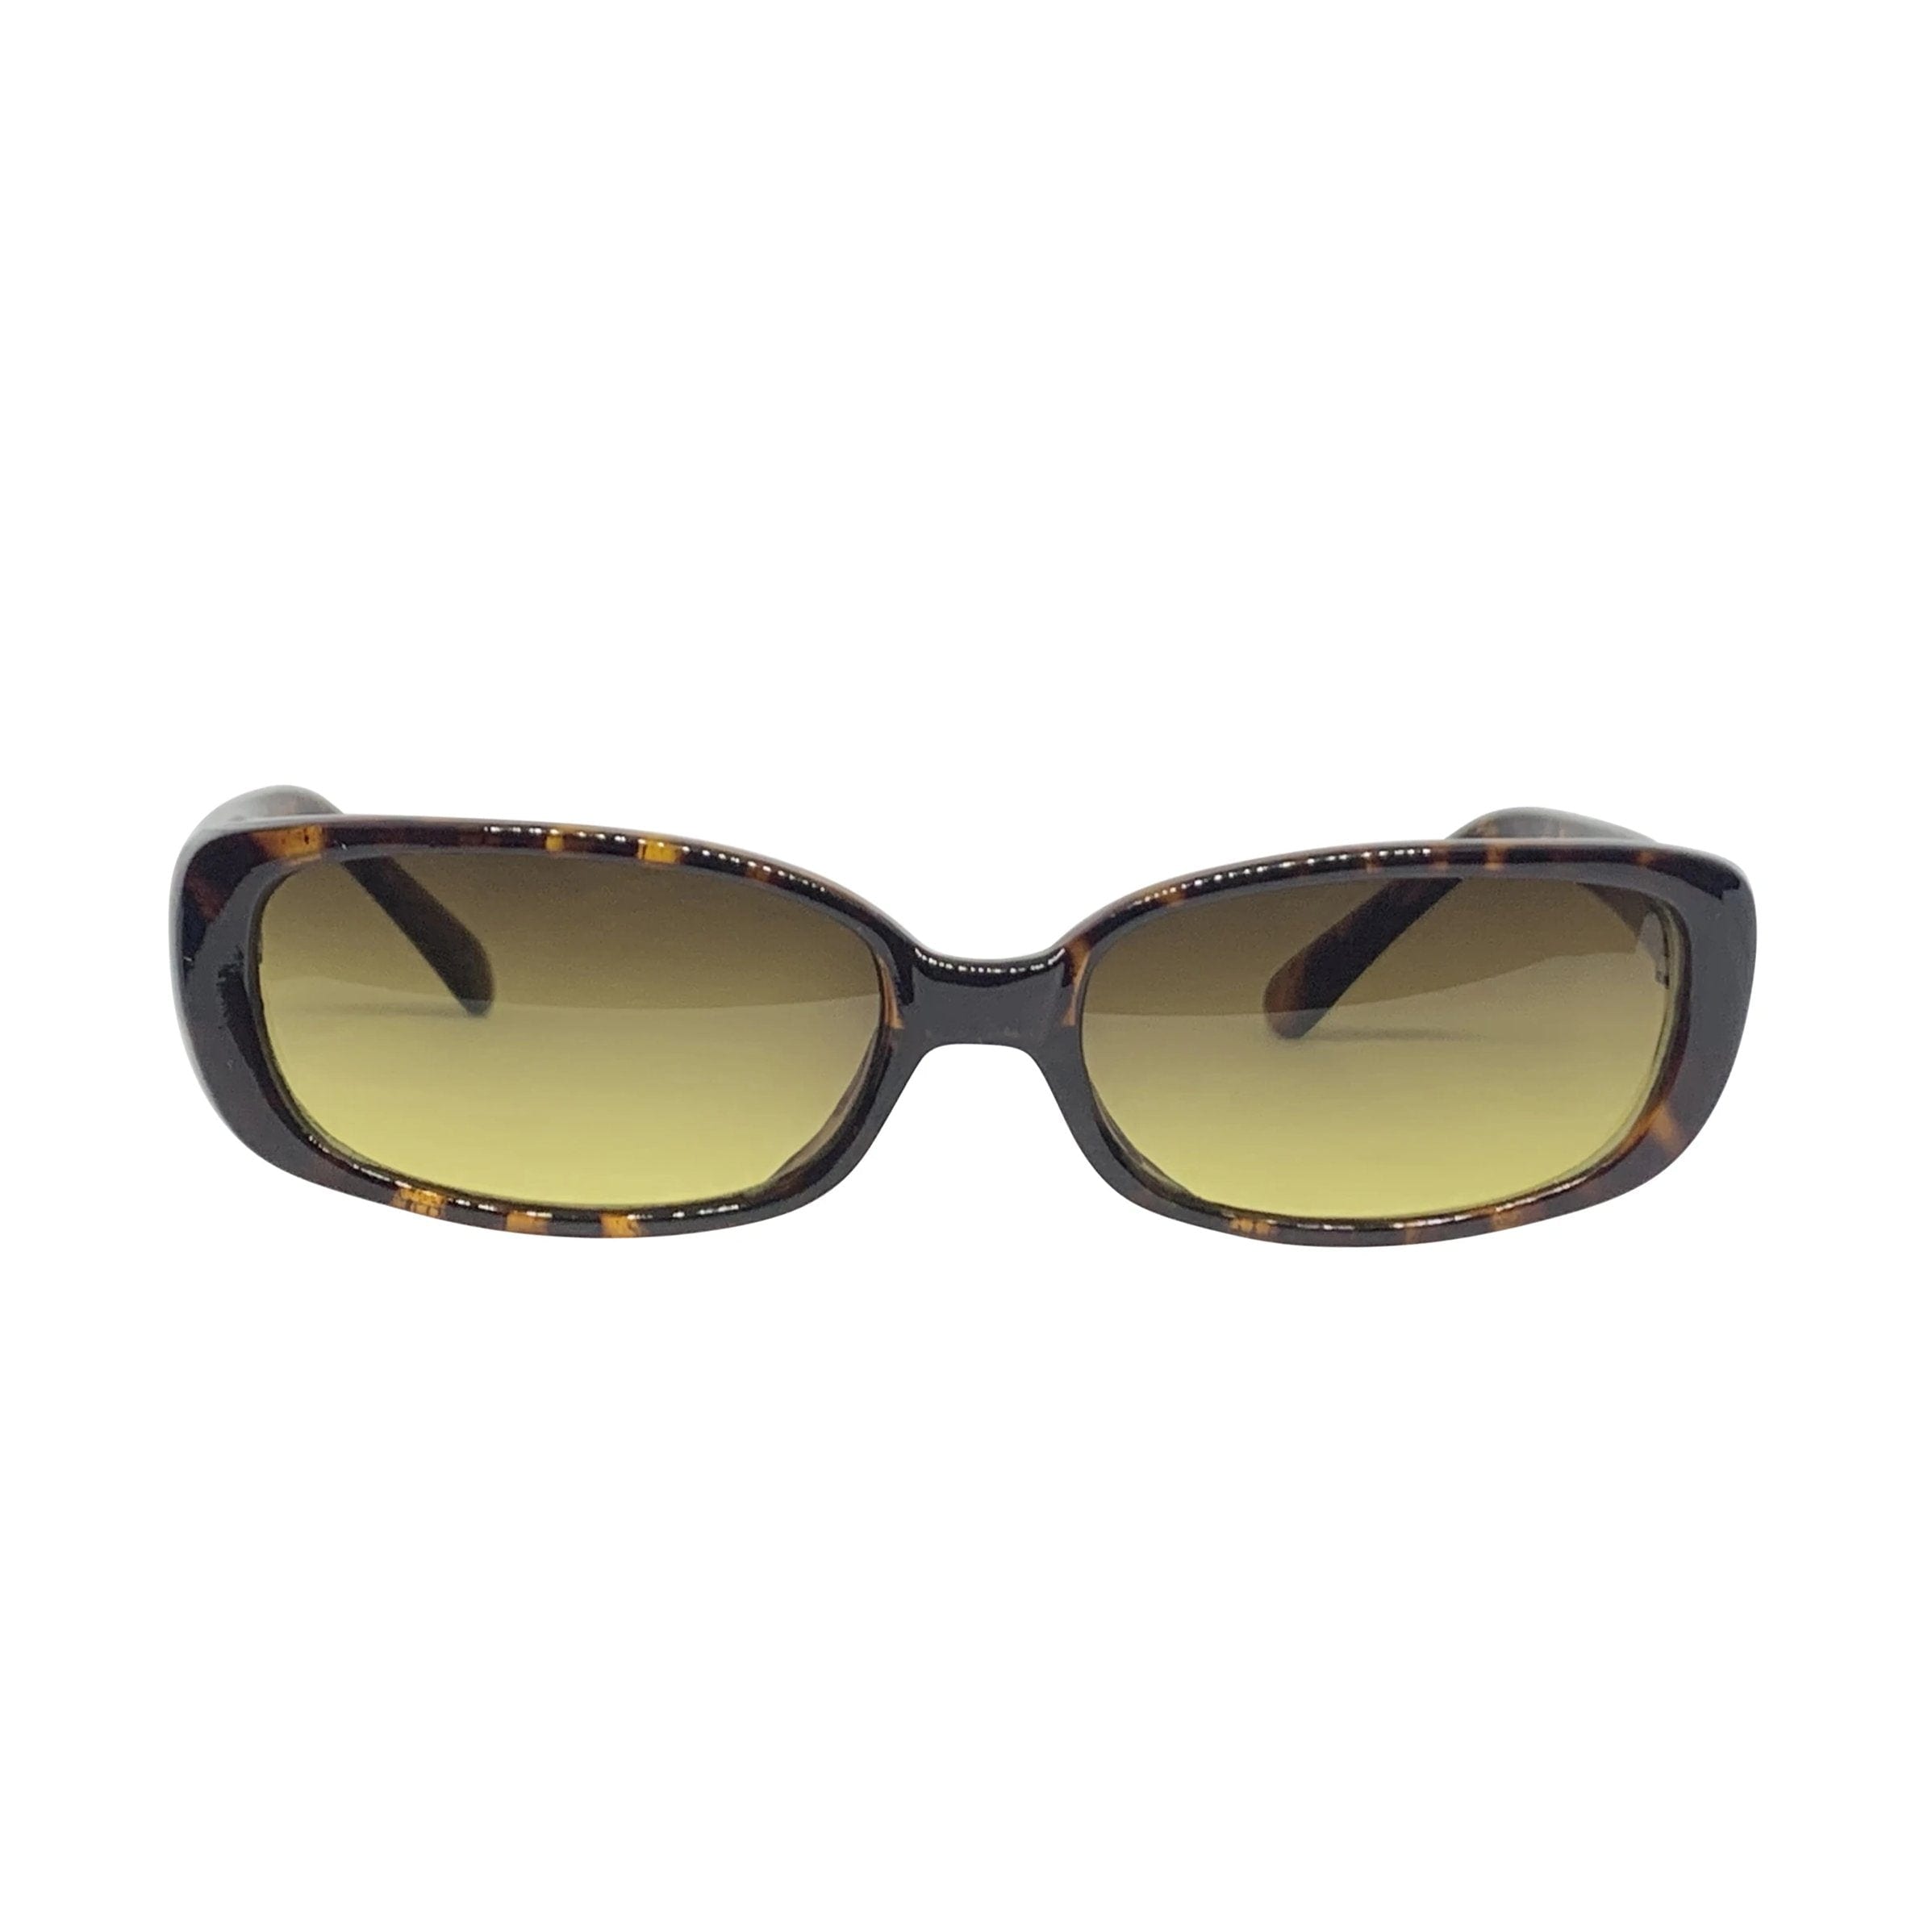 BUGGIN’ Tortoise and Swamp 90s Square Sunnies